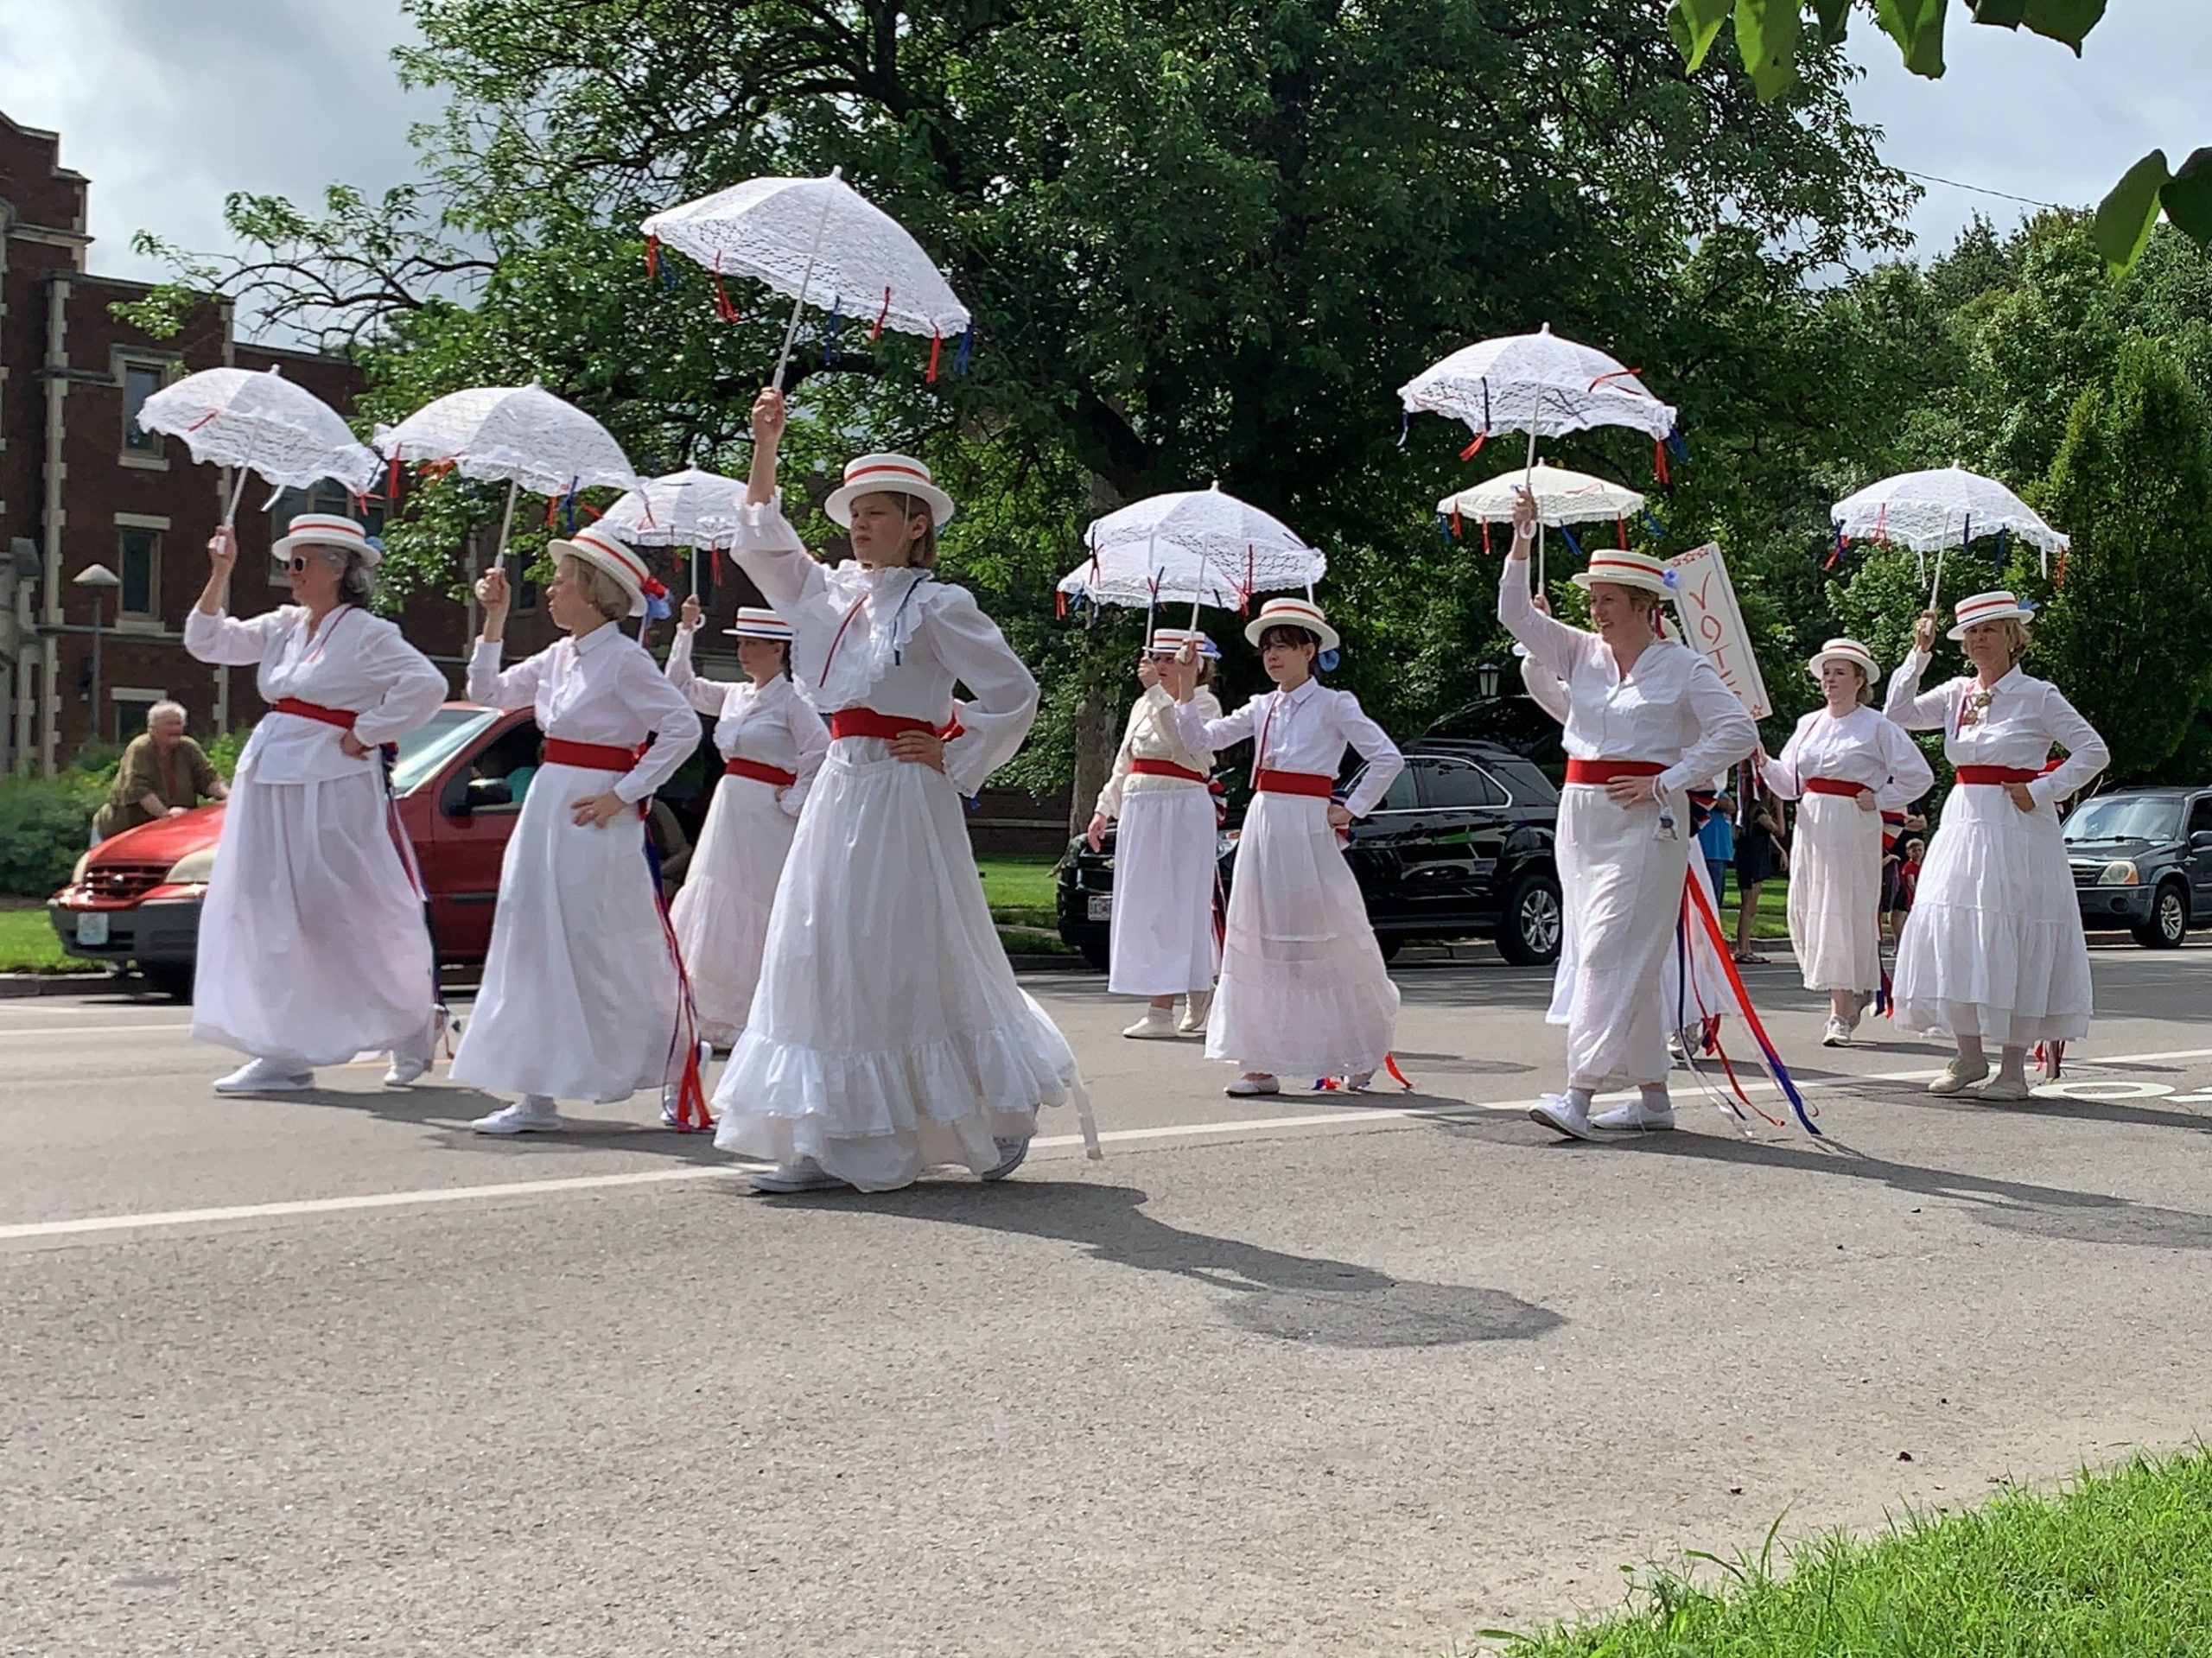 A group of women in white dresses holding white umbrellas marches in a parade